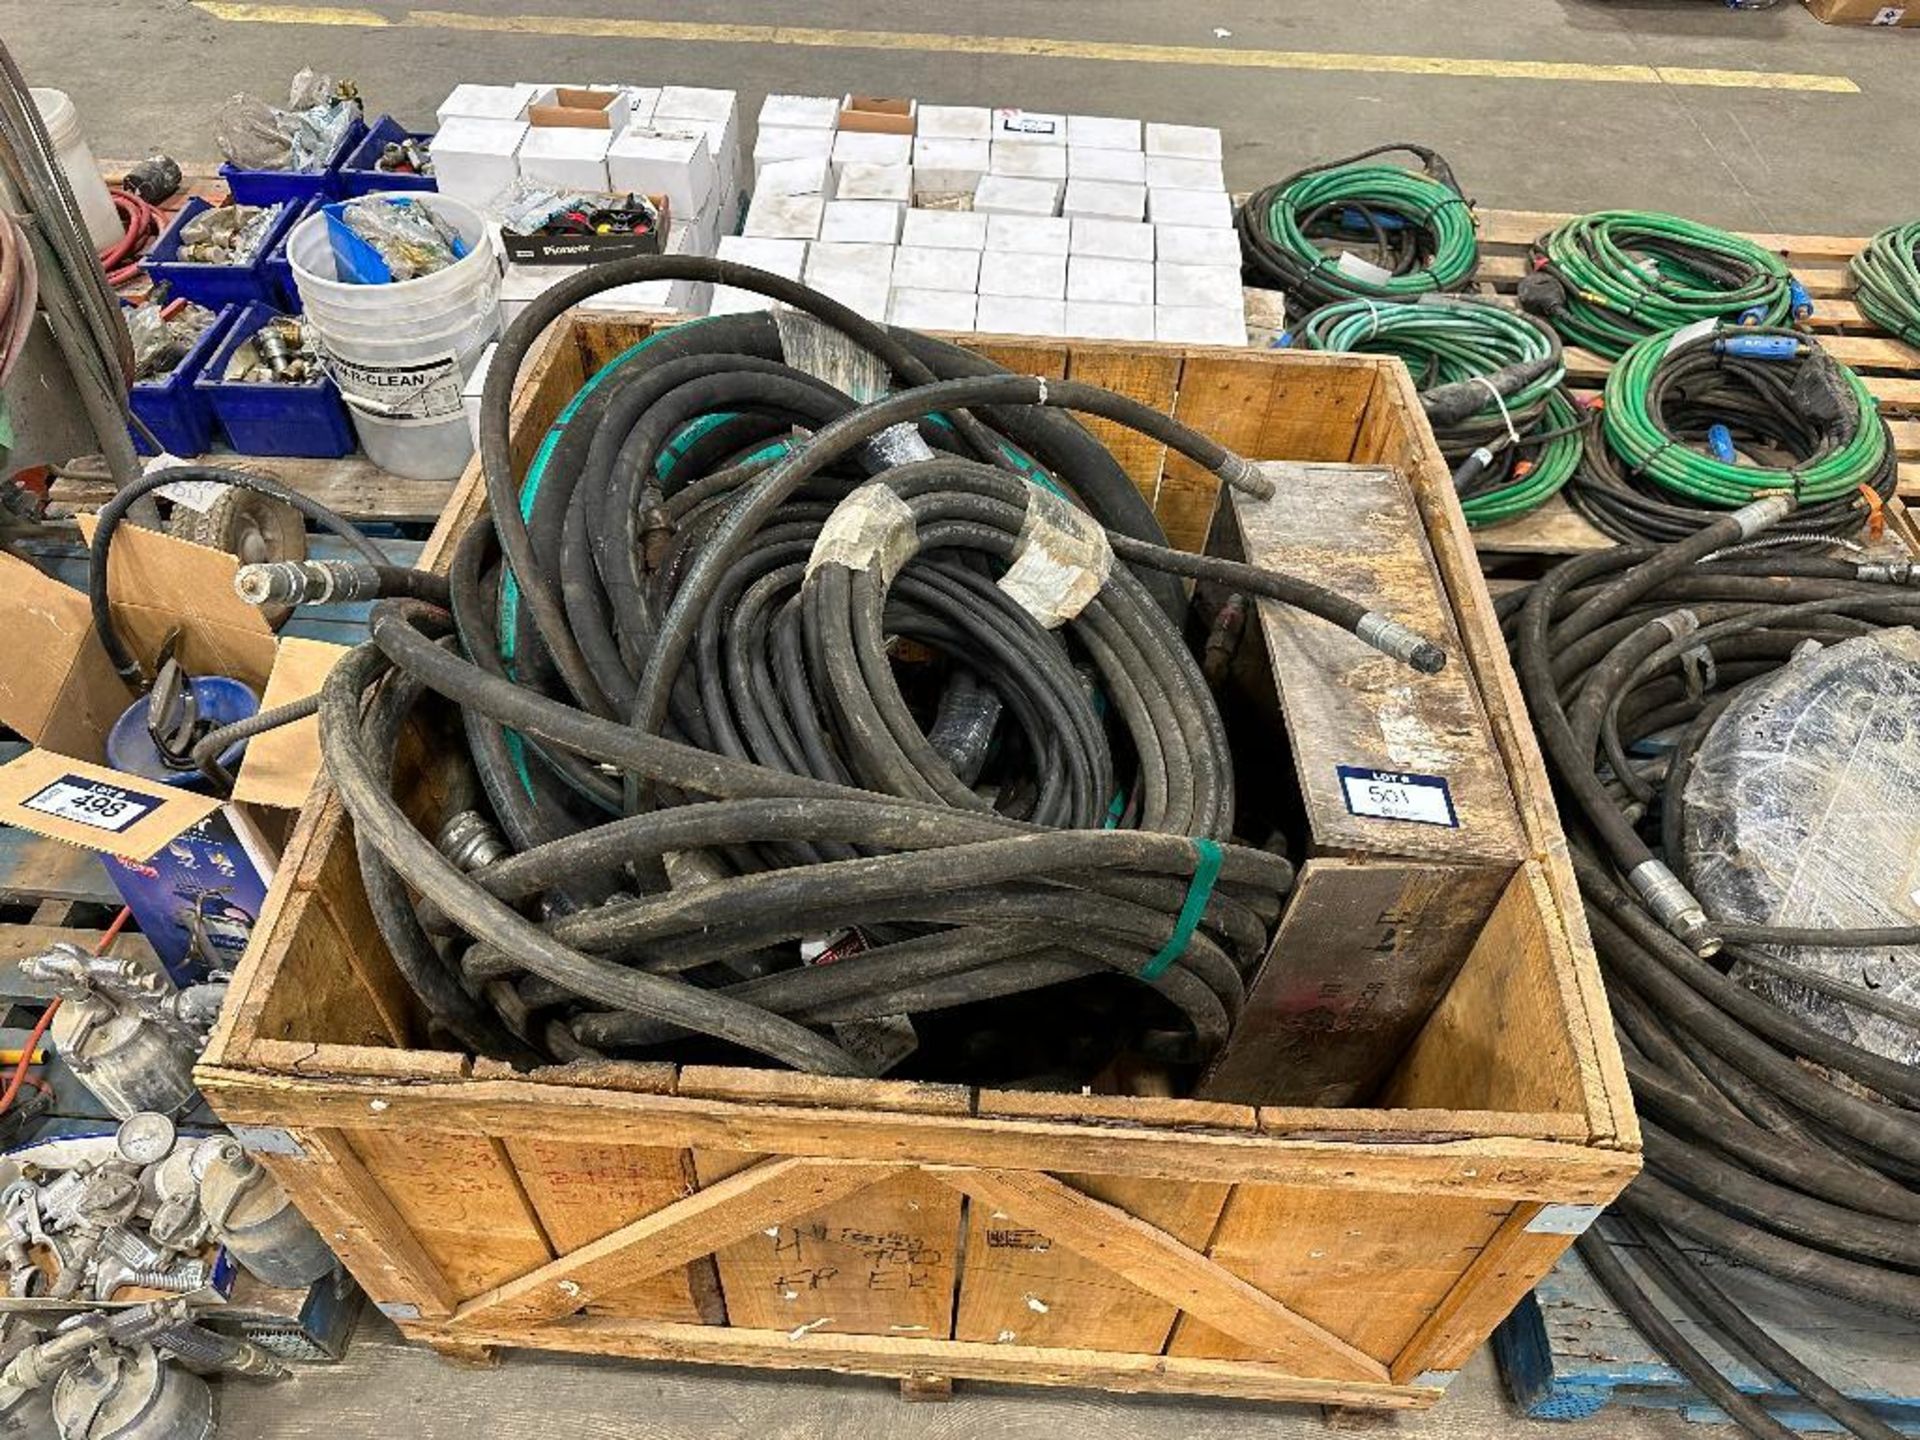 Crate of Asst. Hoses